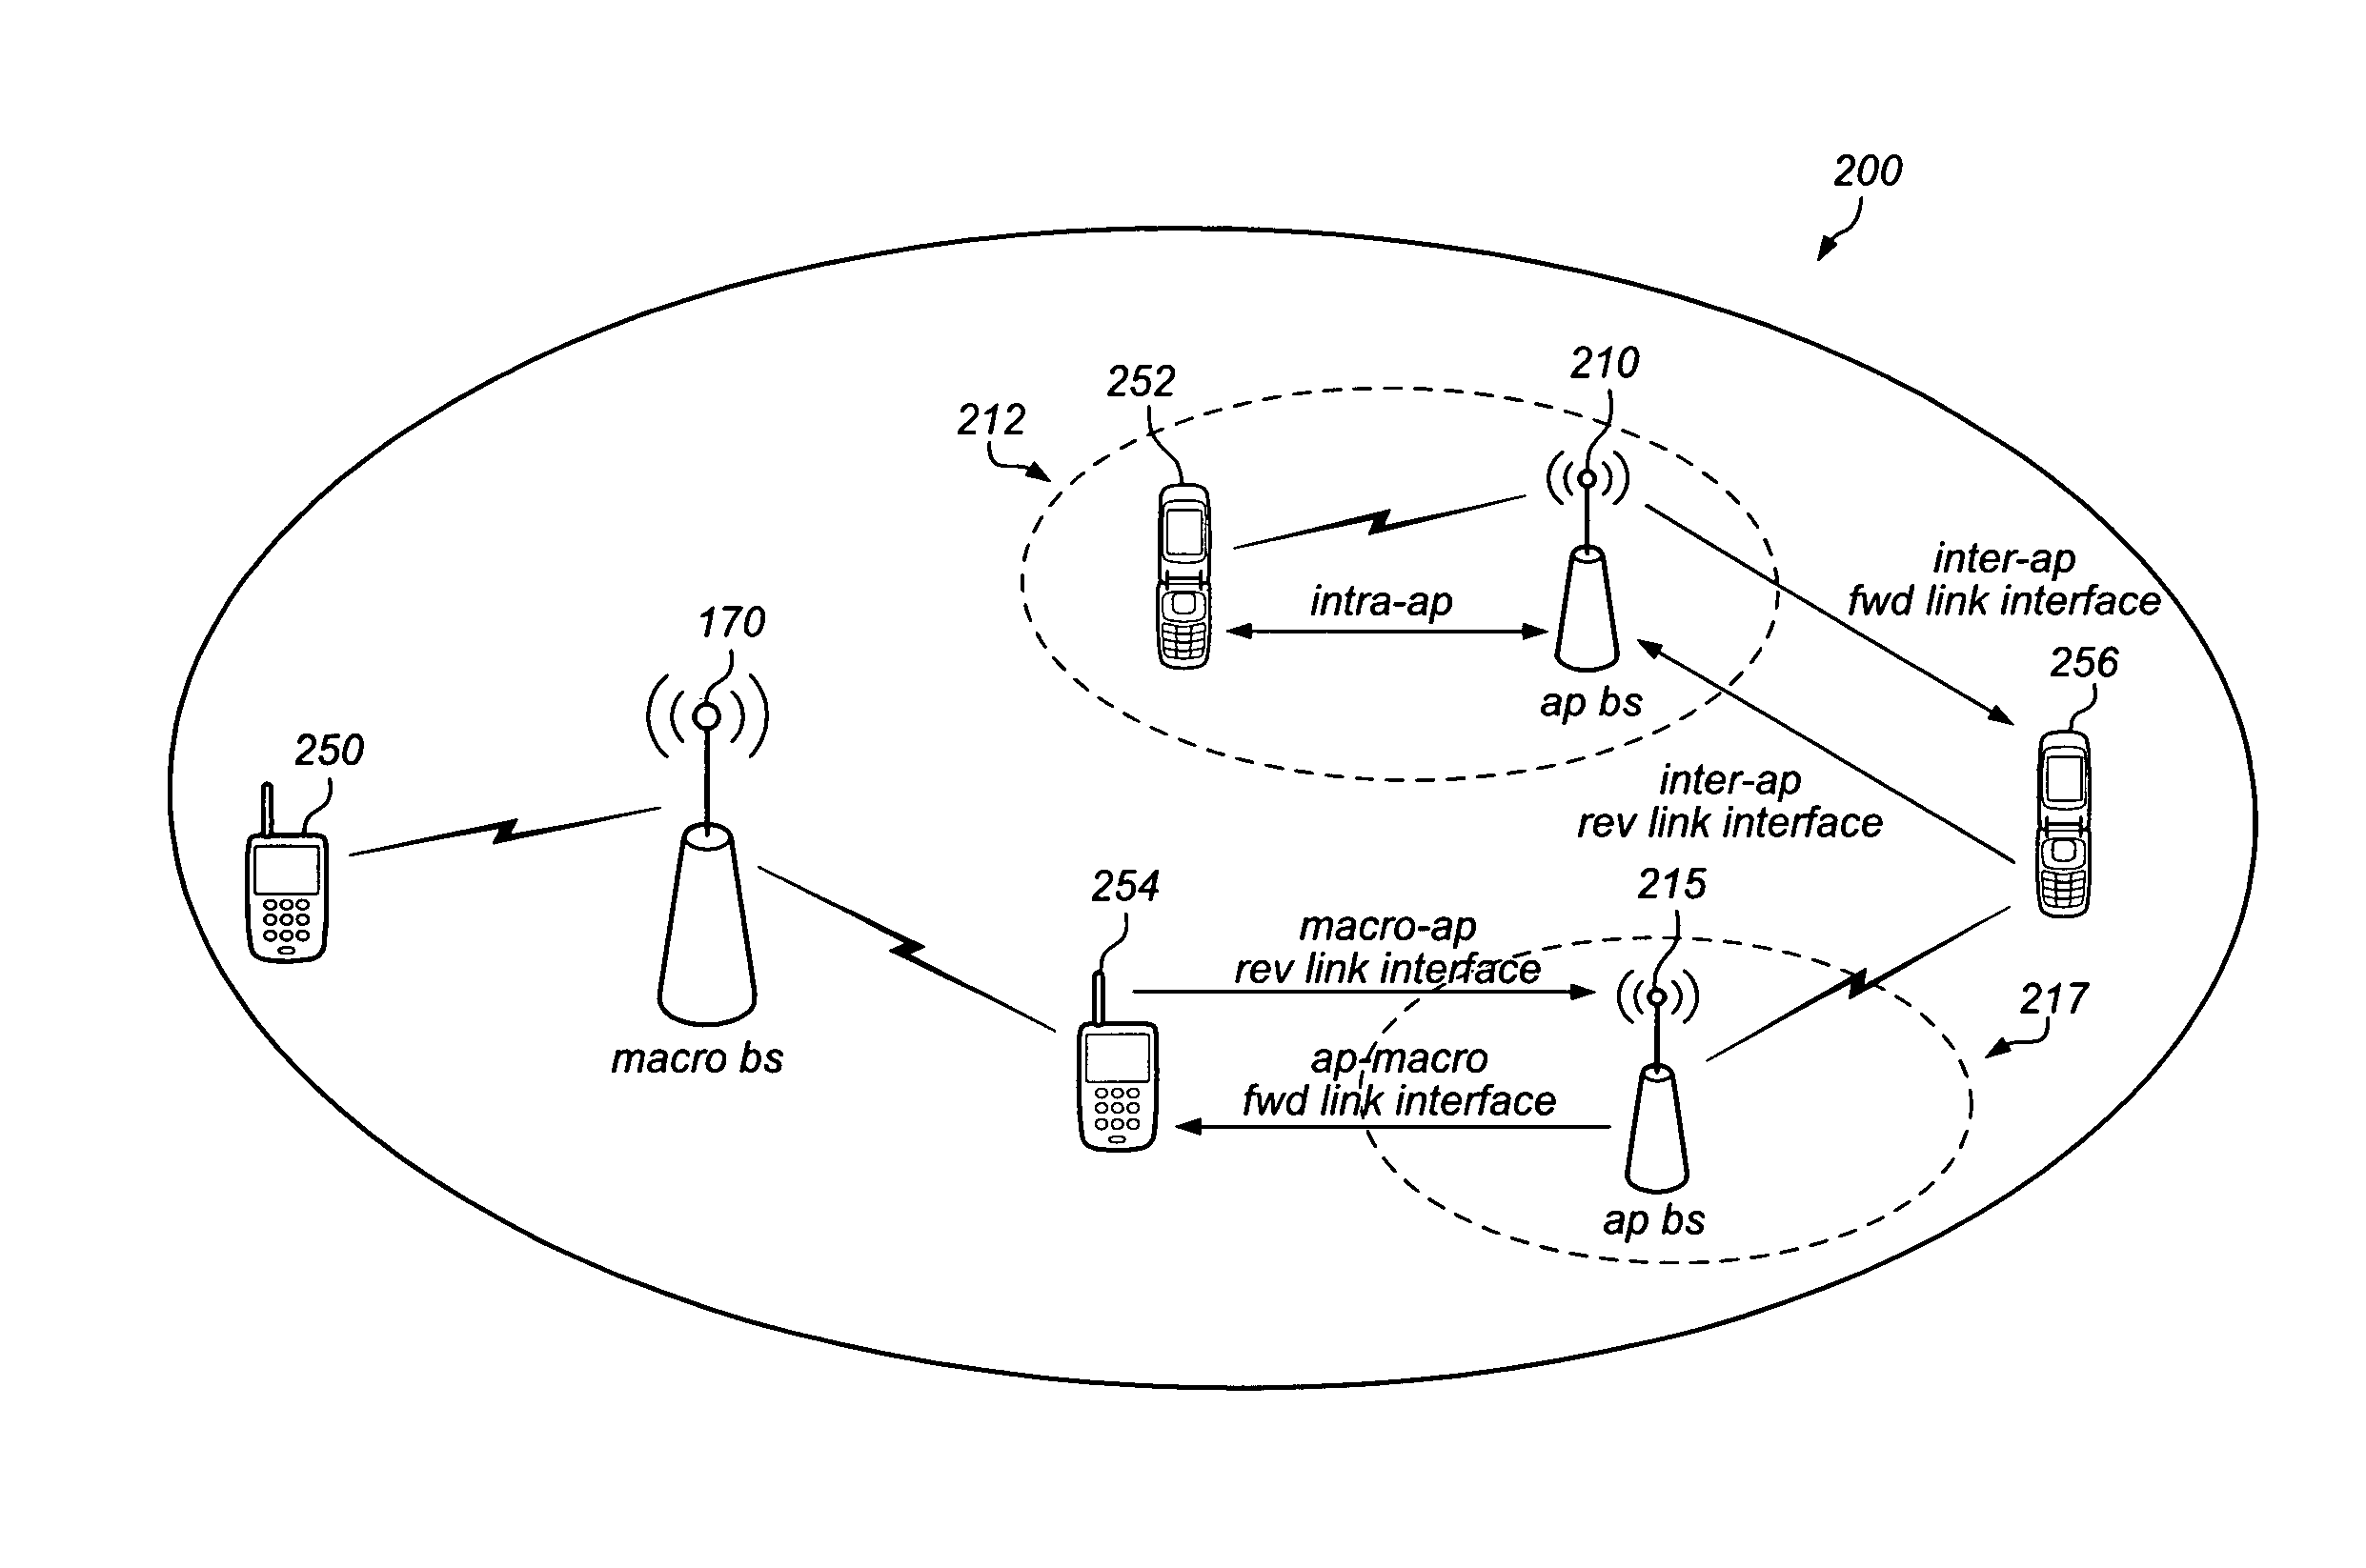 Location assisted connection to femtocell